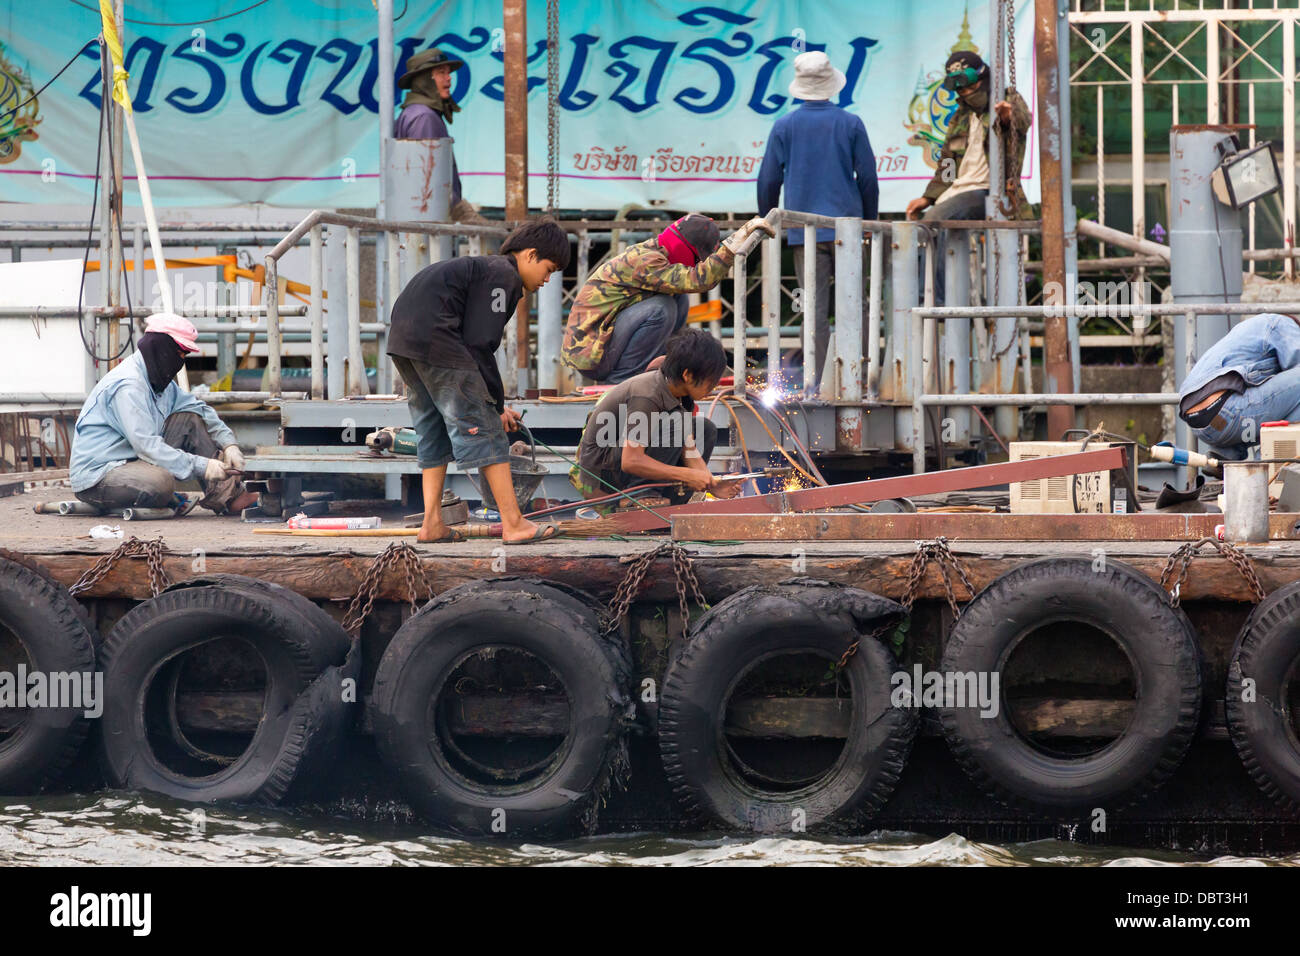 Workers welding on the Banks of the River Chao Phraya in Bangkok, Thailand Stock Photo